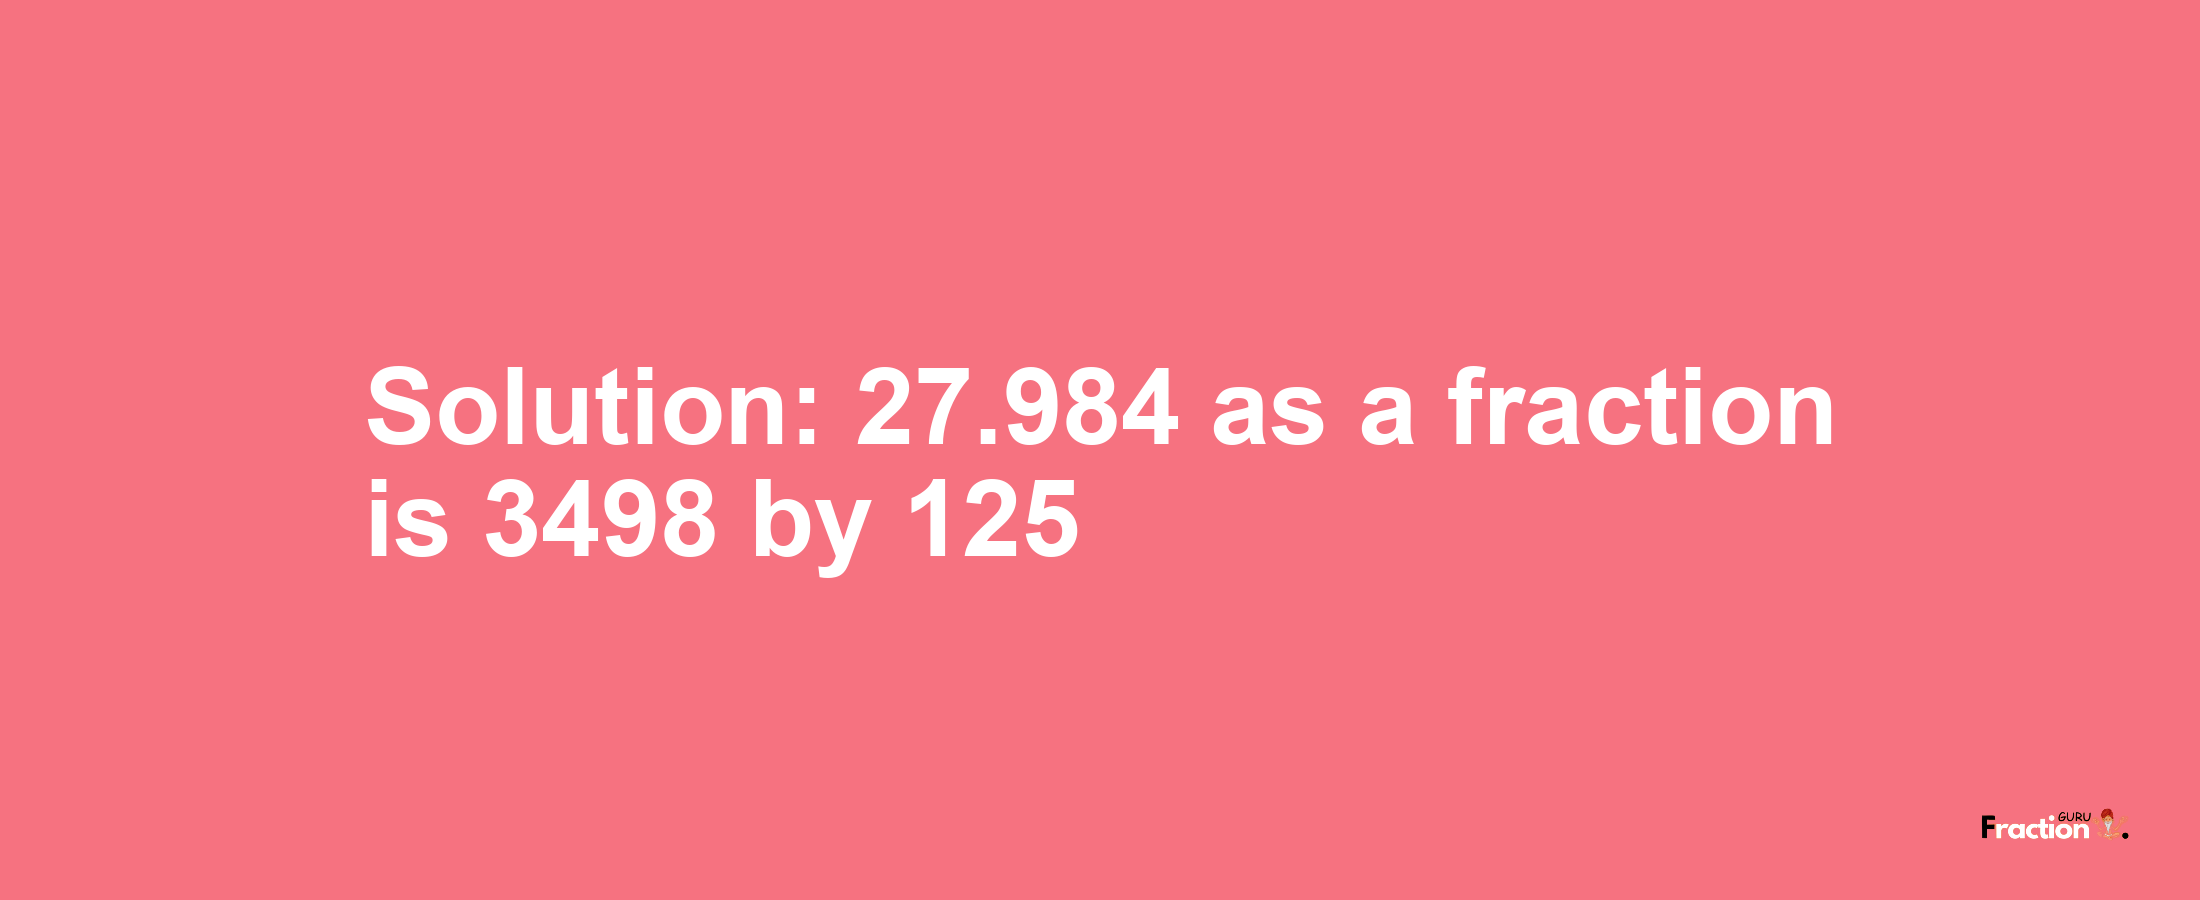 Solution:27.984 as a fraction is 3498/125